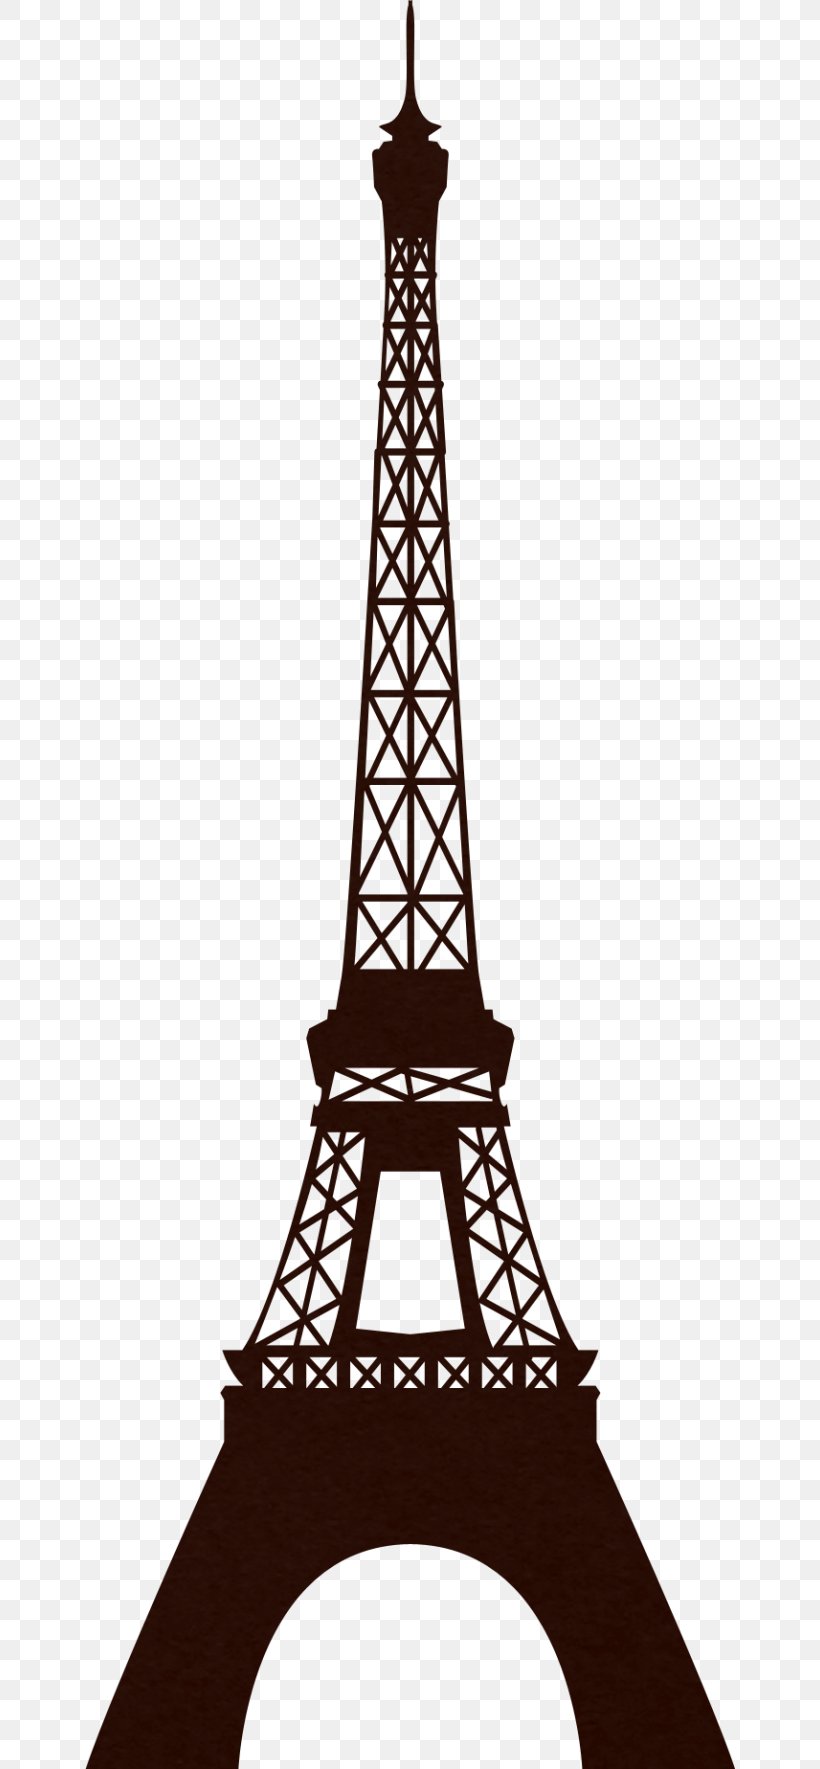 Eiffel Tower Silhouette Clip Art, PNG, 650x1769px, Eiffel Tower, Drawing, Landmark, Paris, Photography Download Free